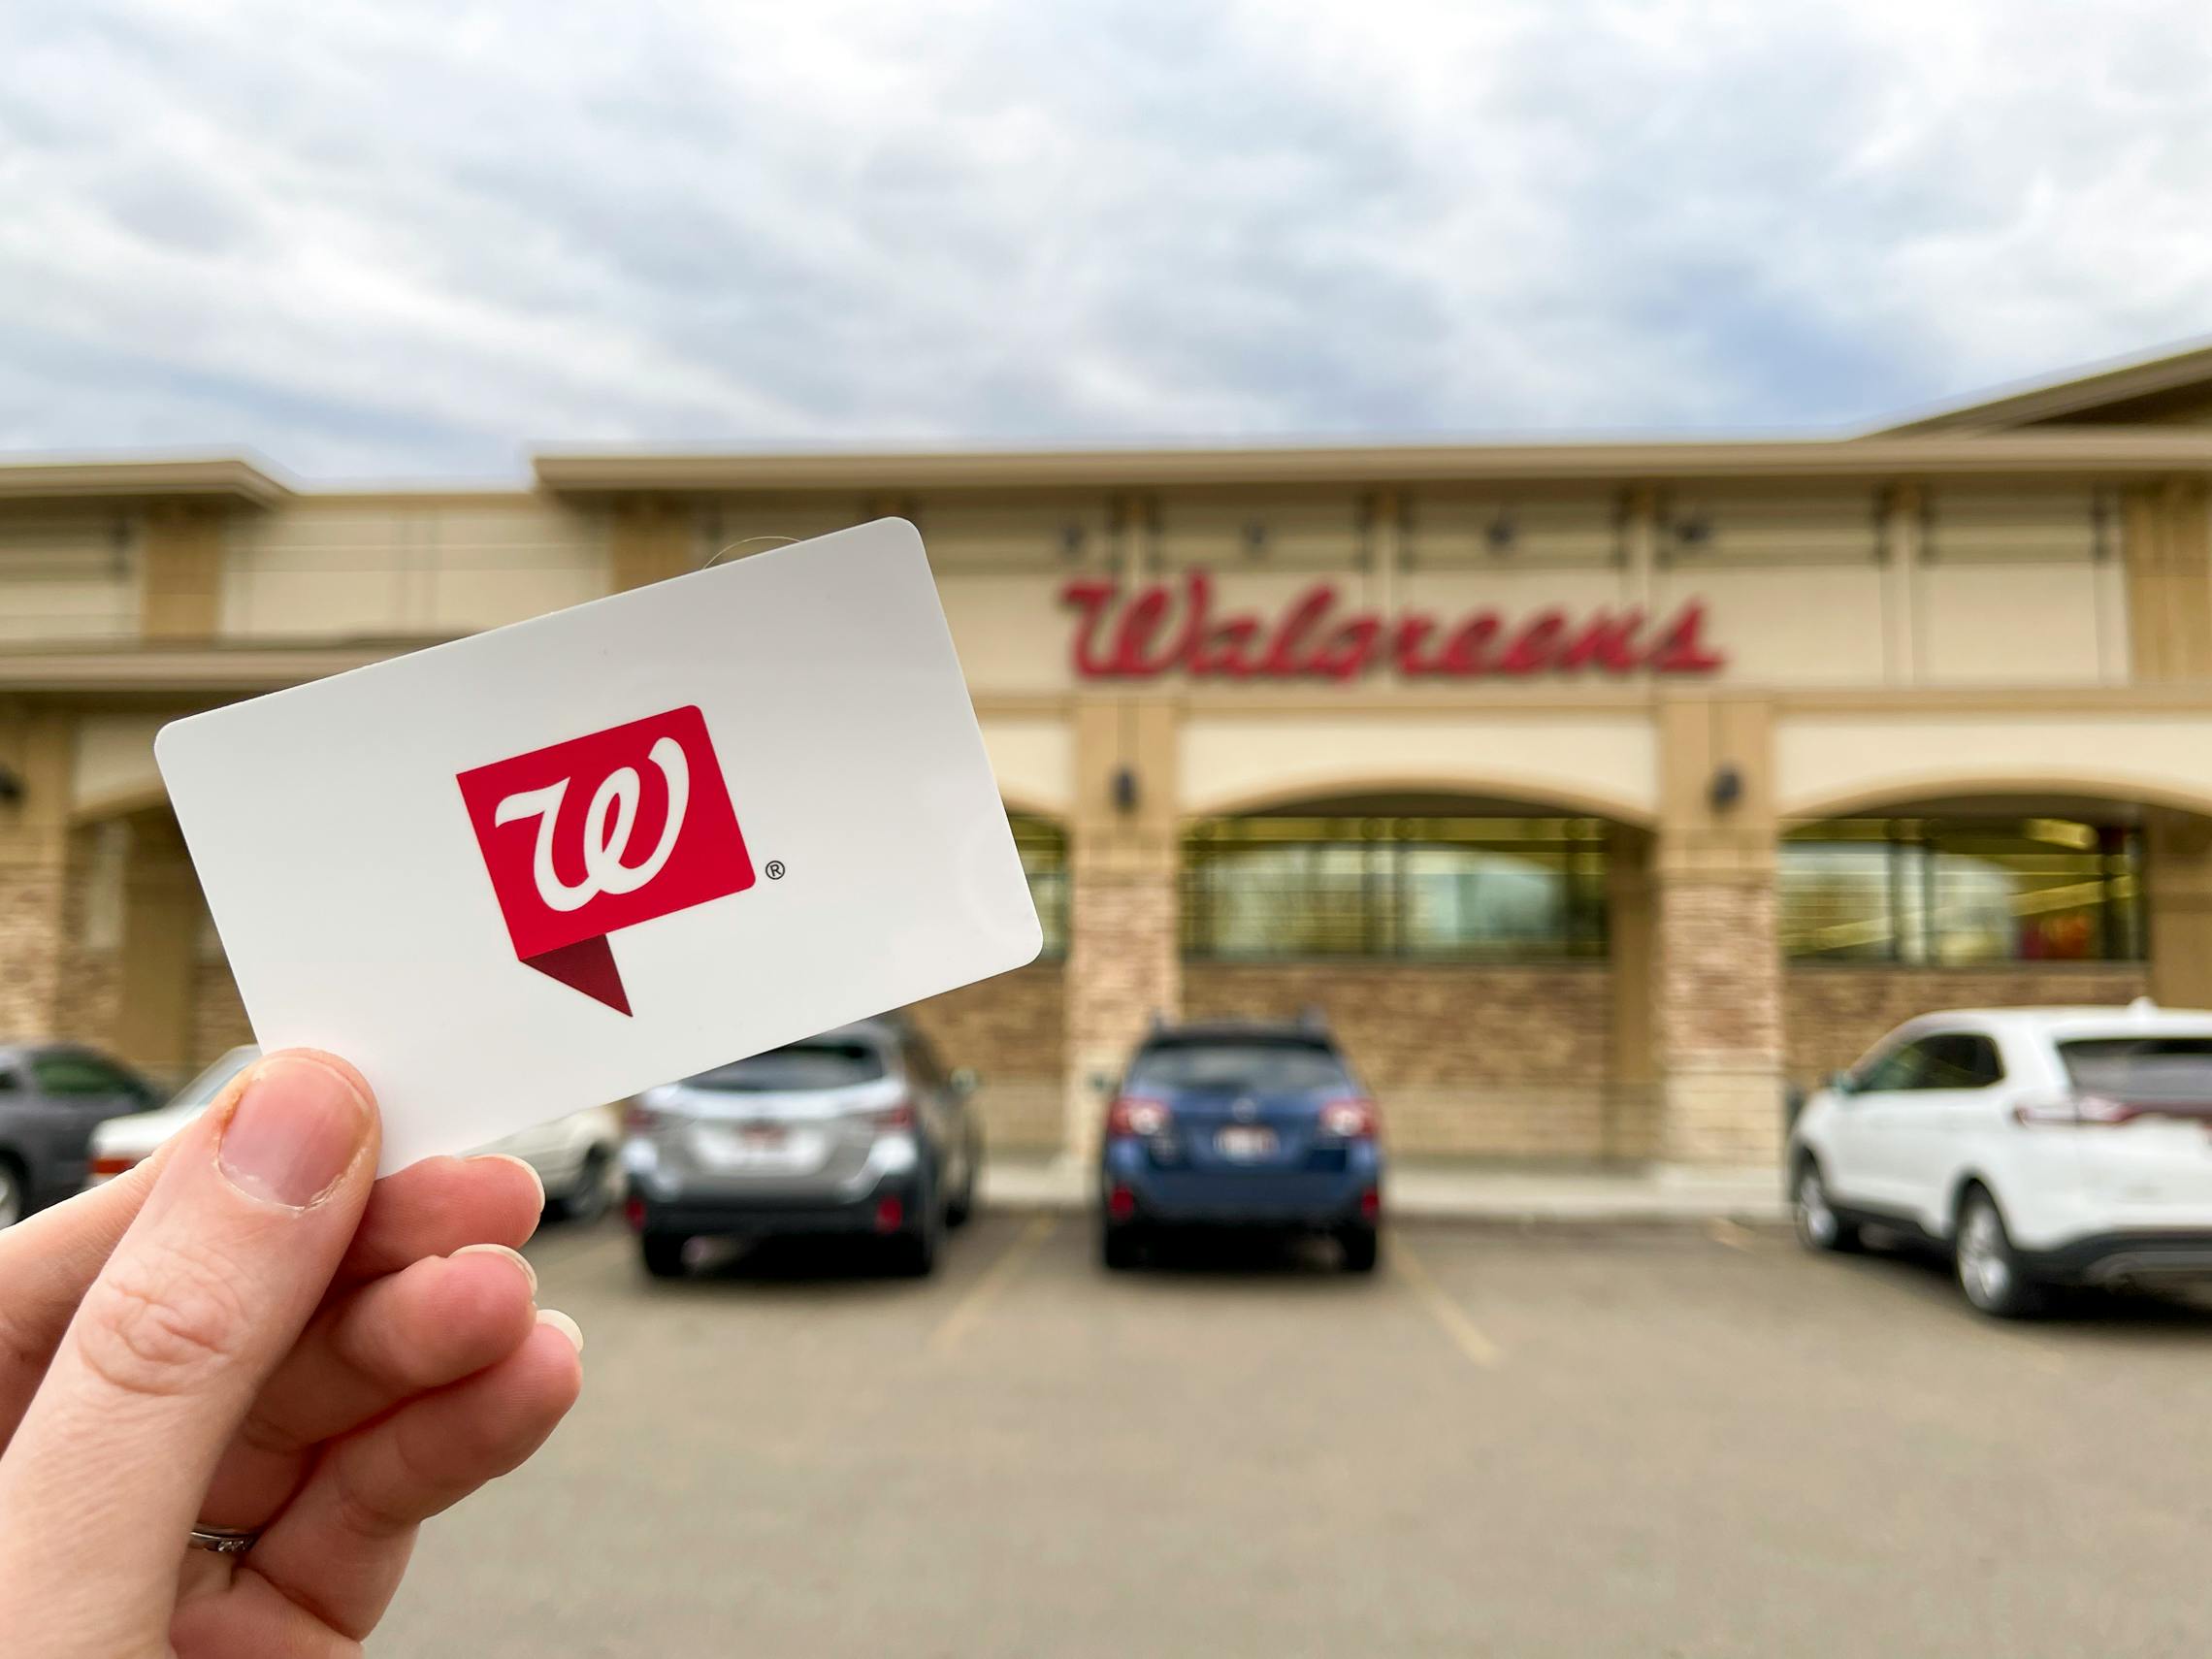 A person holding a Walgreens gift card in front of Walgreens.